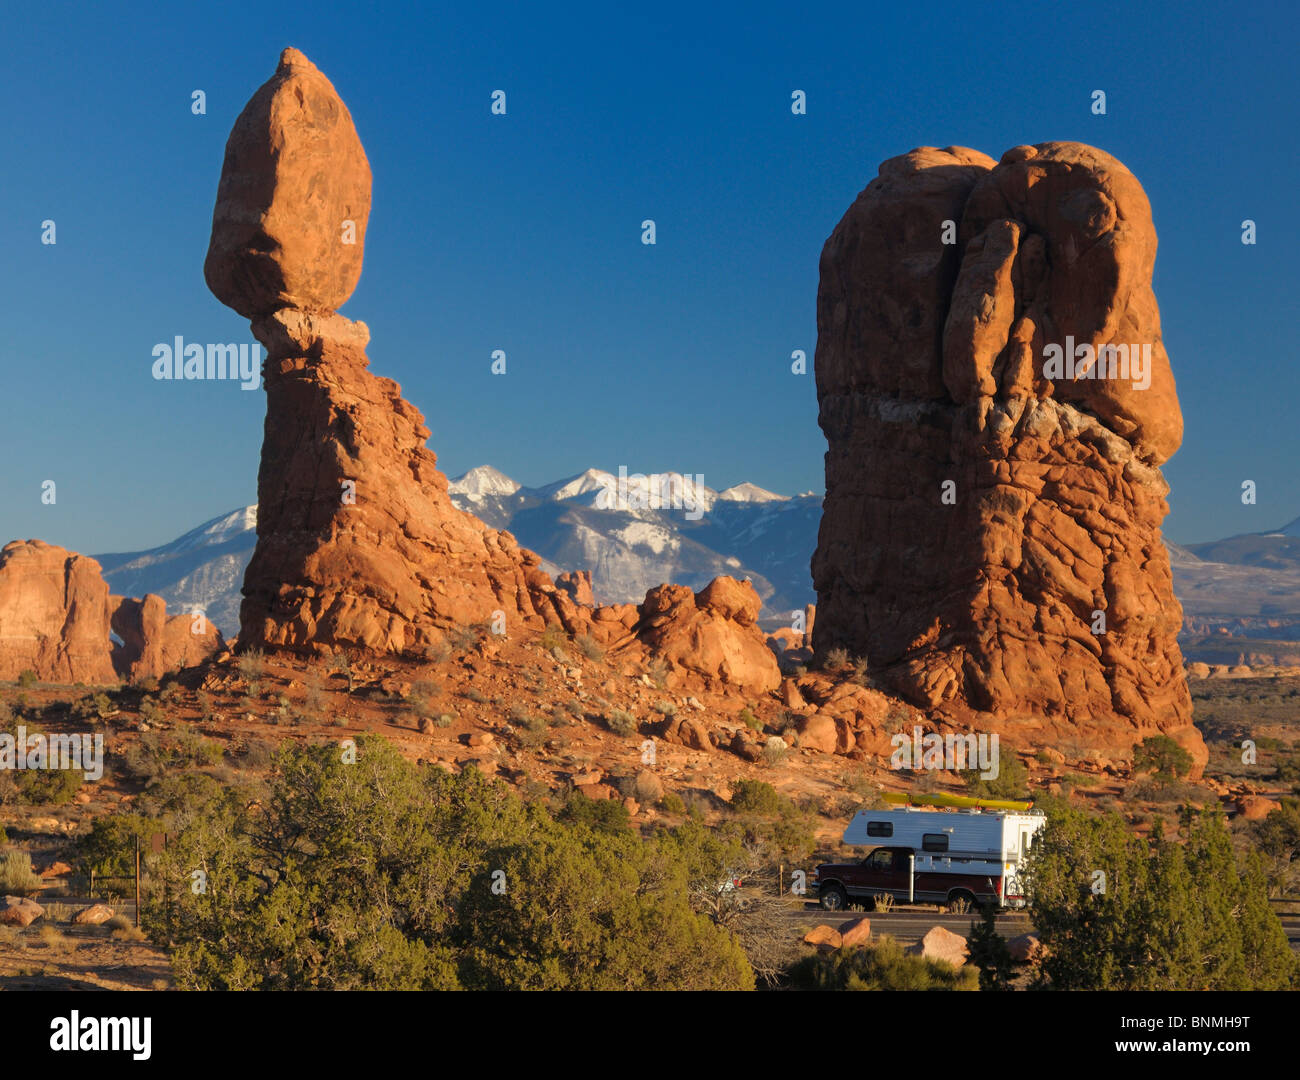 Balanced Rock rock stone formation camper camping caravan National Park landscape mountains snow nature sky sunlight Arches Stock Photo